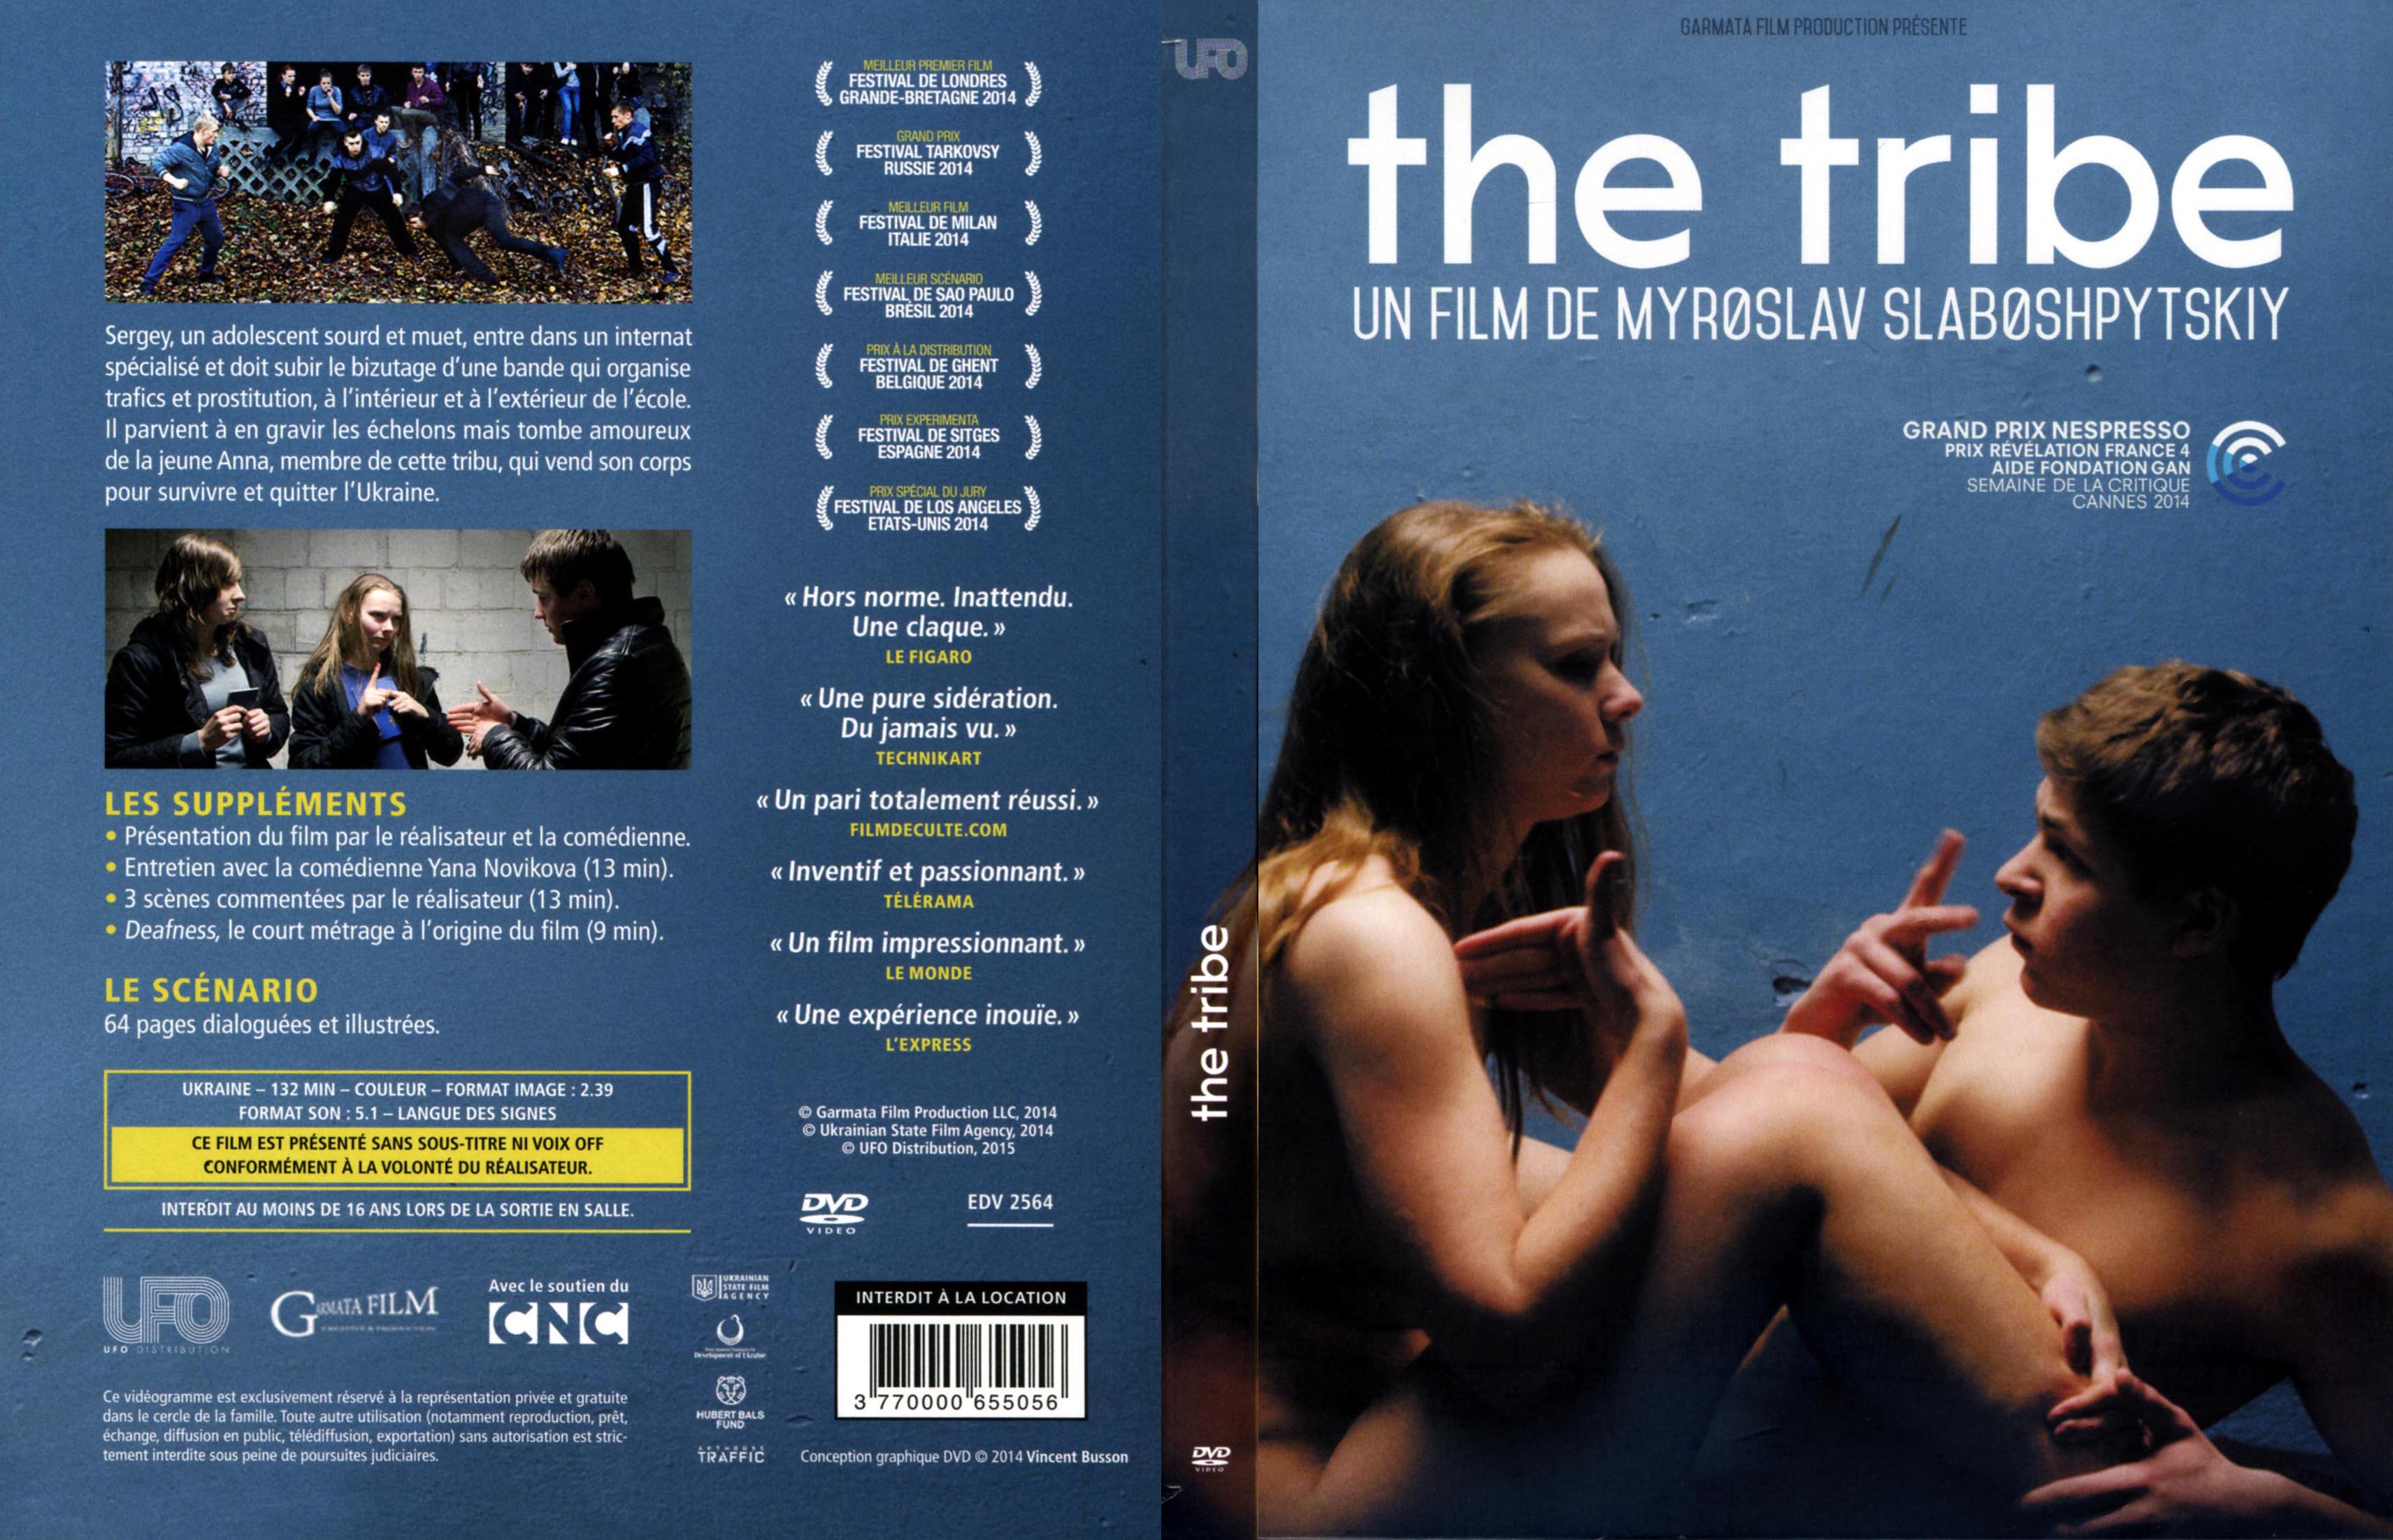 Jaquette DVD The tribe (2014)